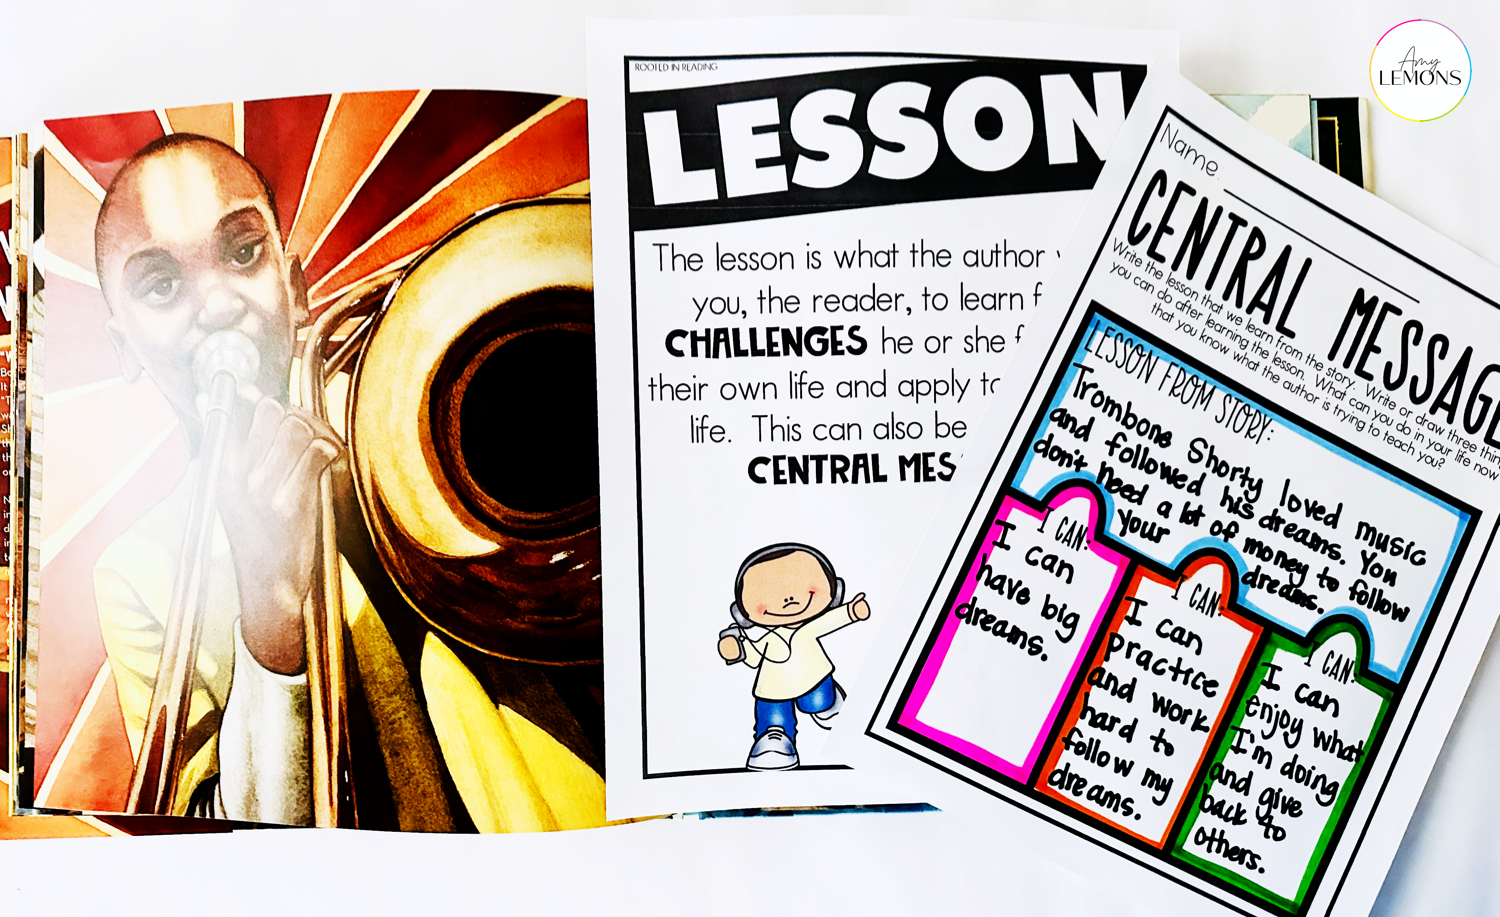 The book Trombone Shorty with reading comprehension lesson plans and activities.